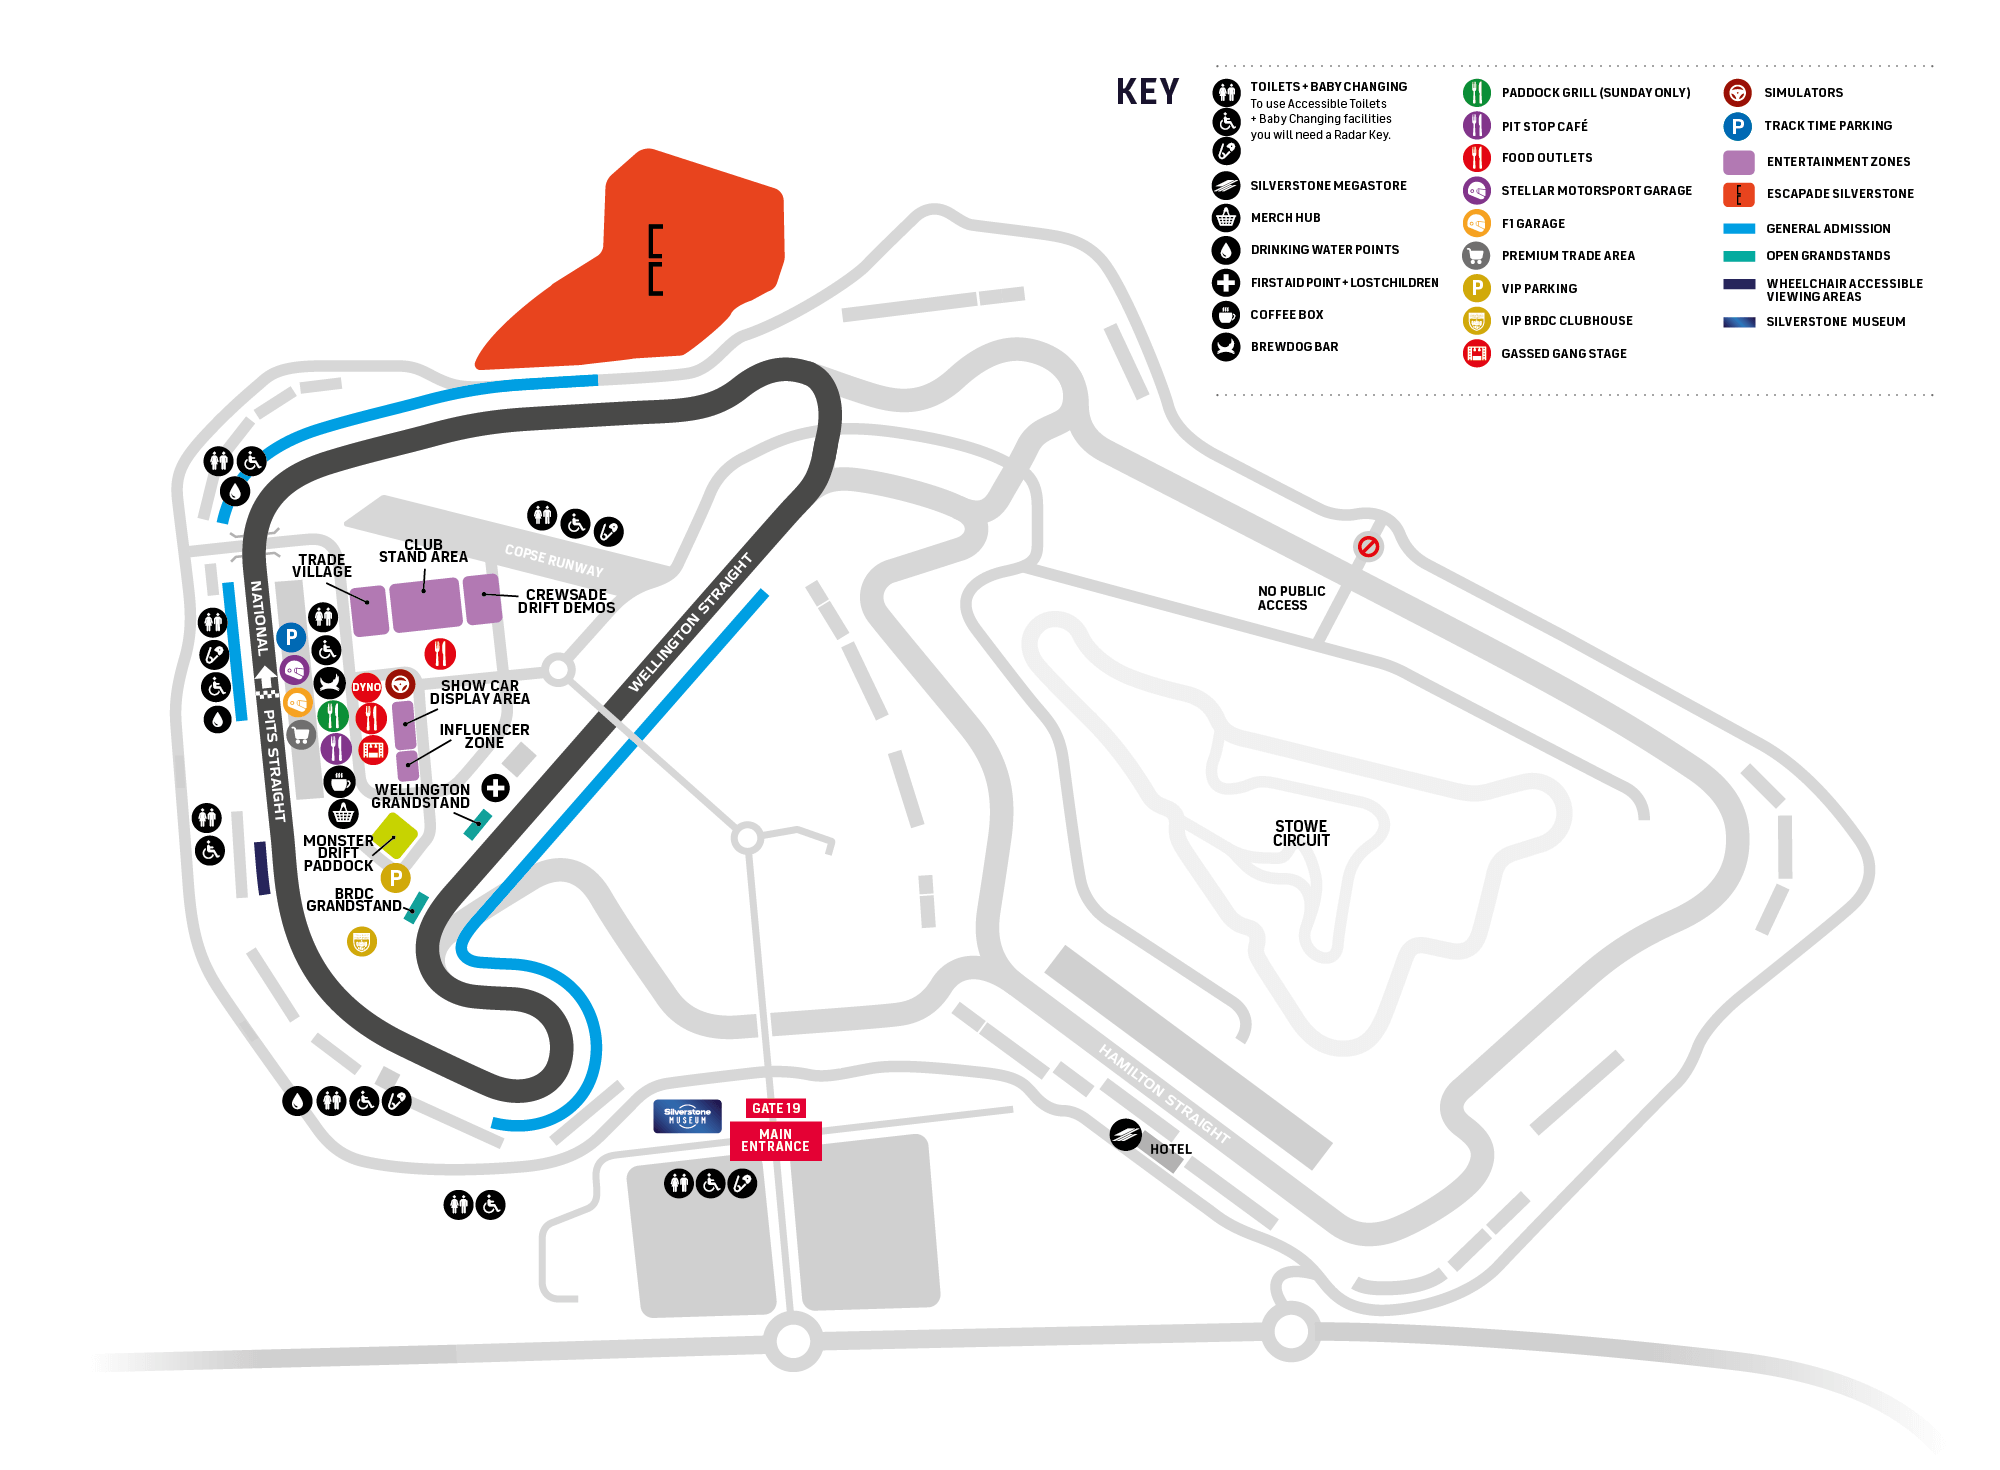 map of gassed on track event at silverstone